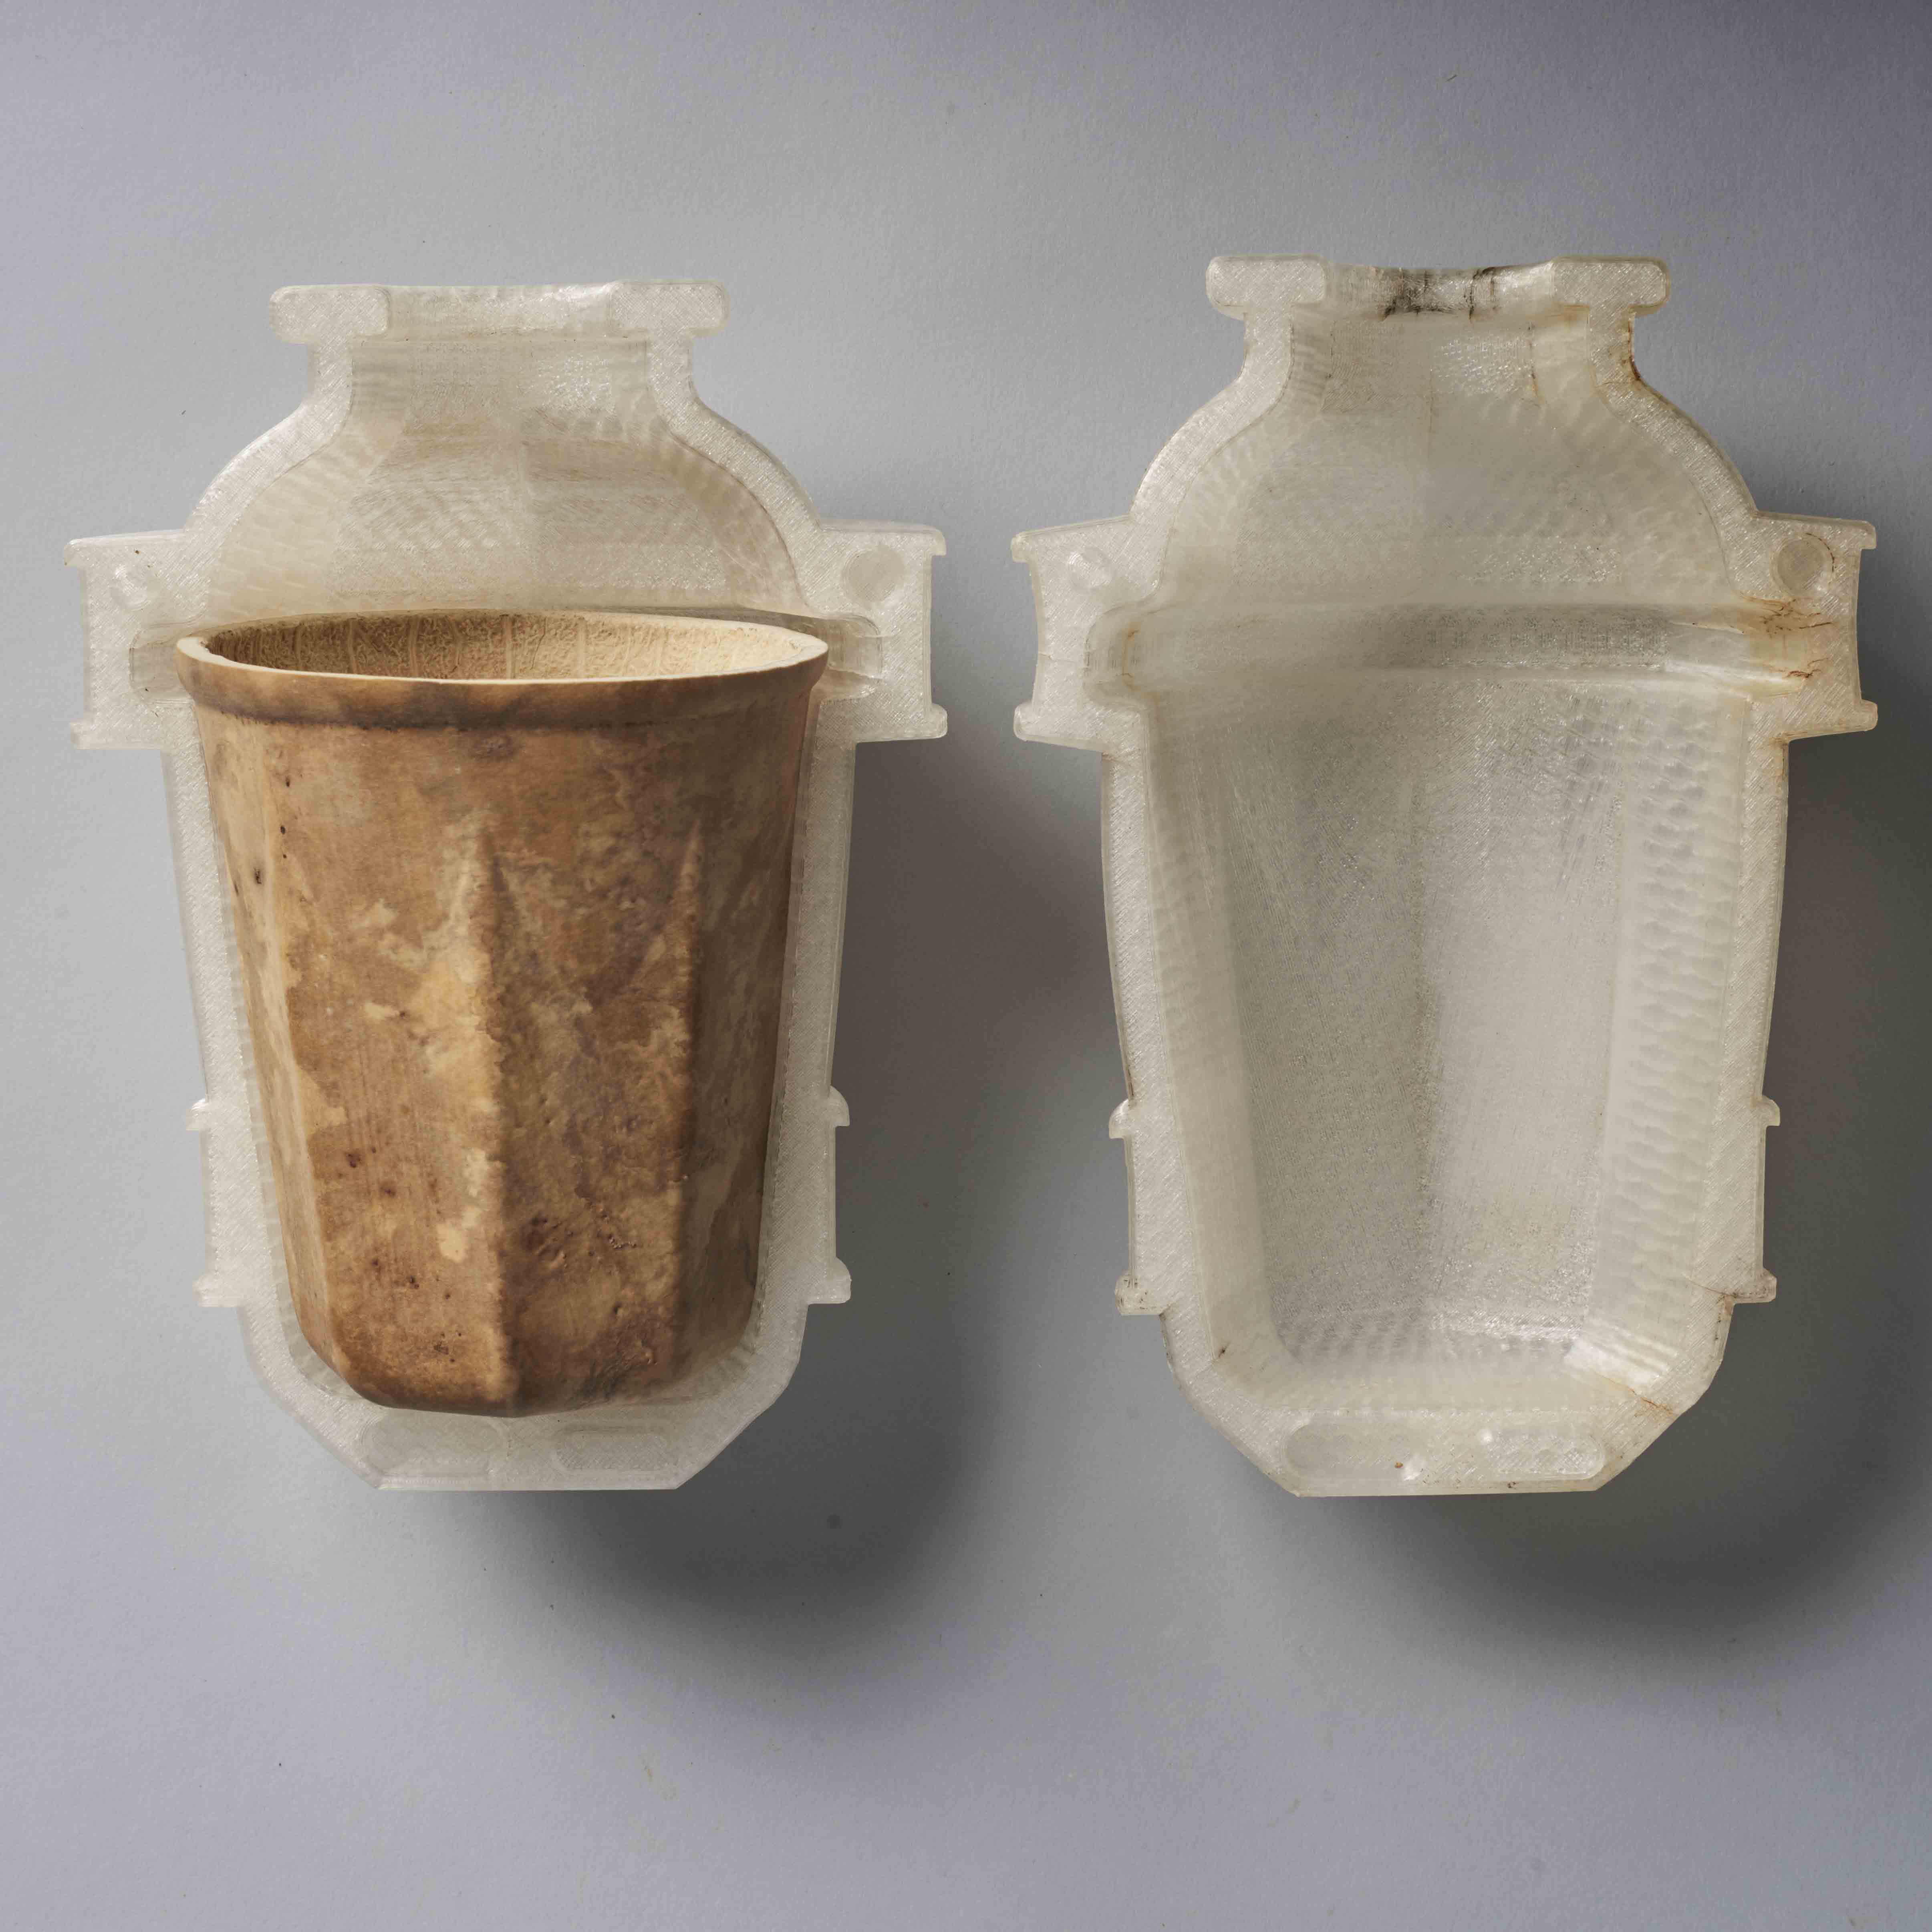 The biodegradable HyO-Cup in the 3D printed molds. Photo via CRÈME.